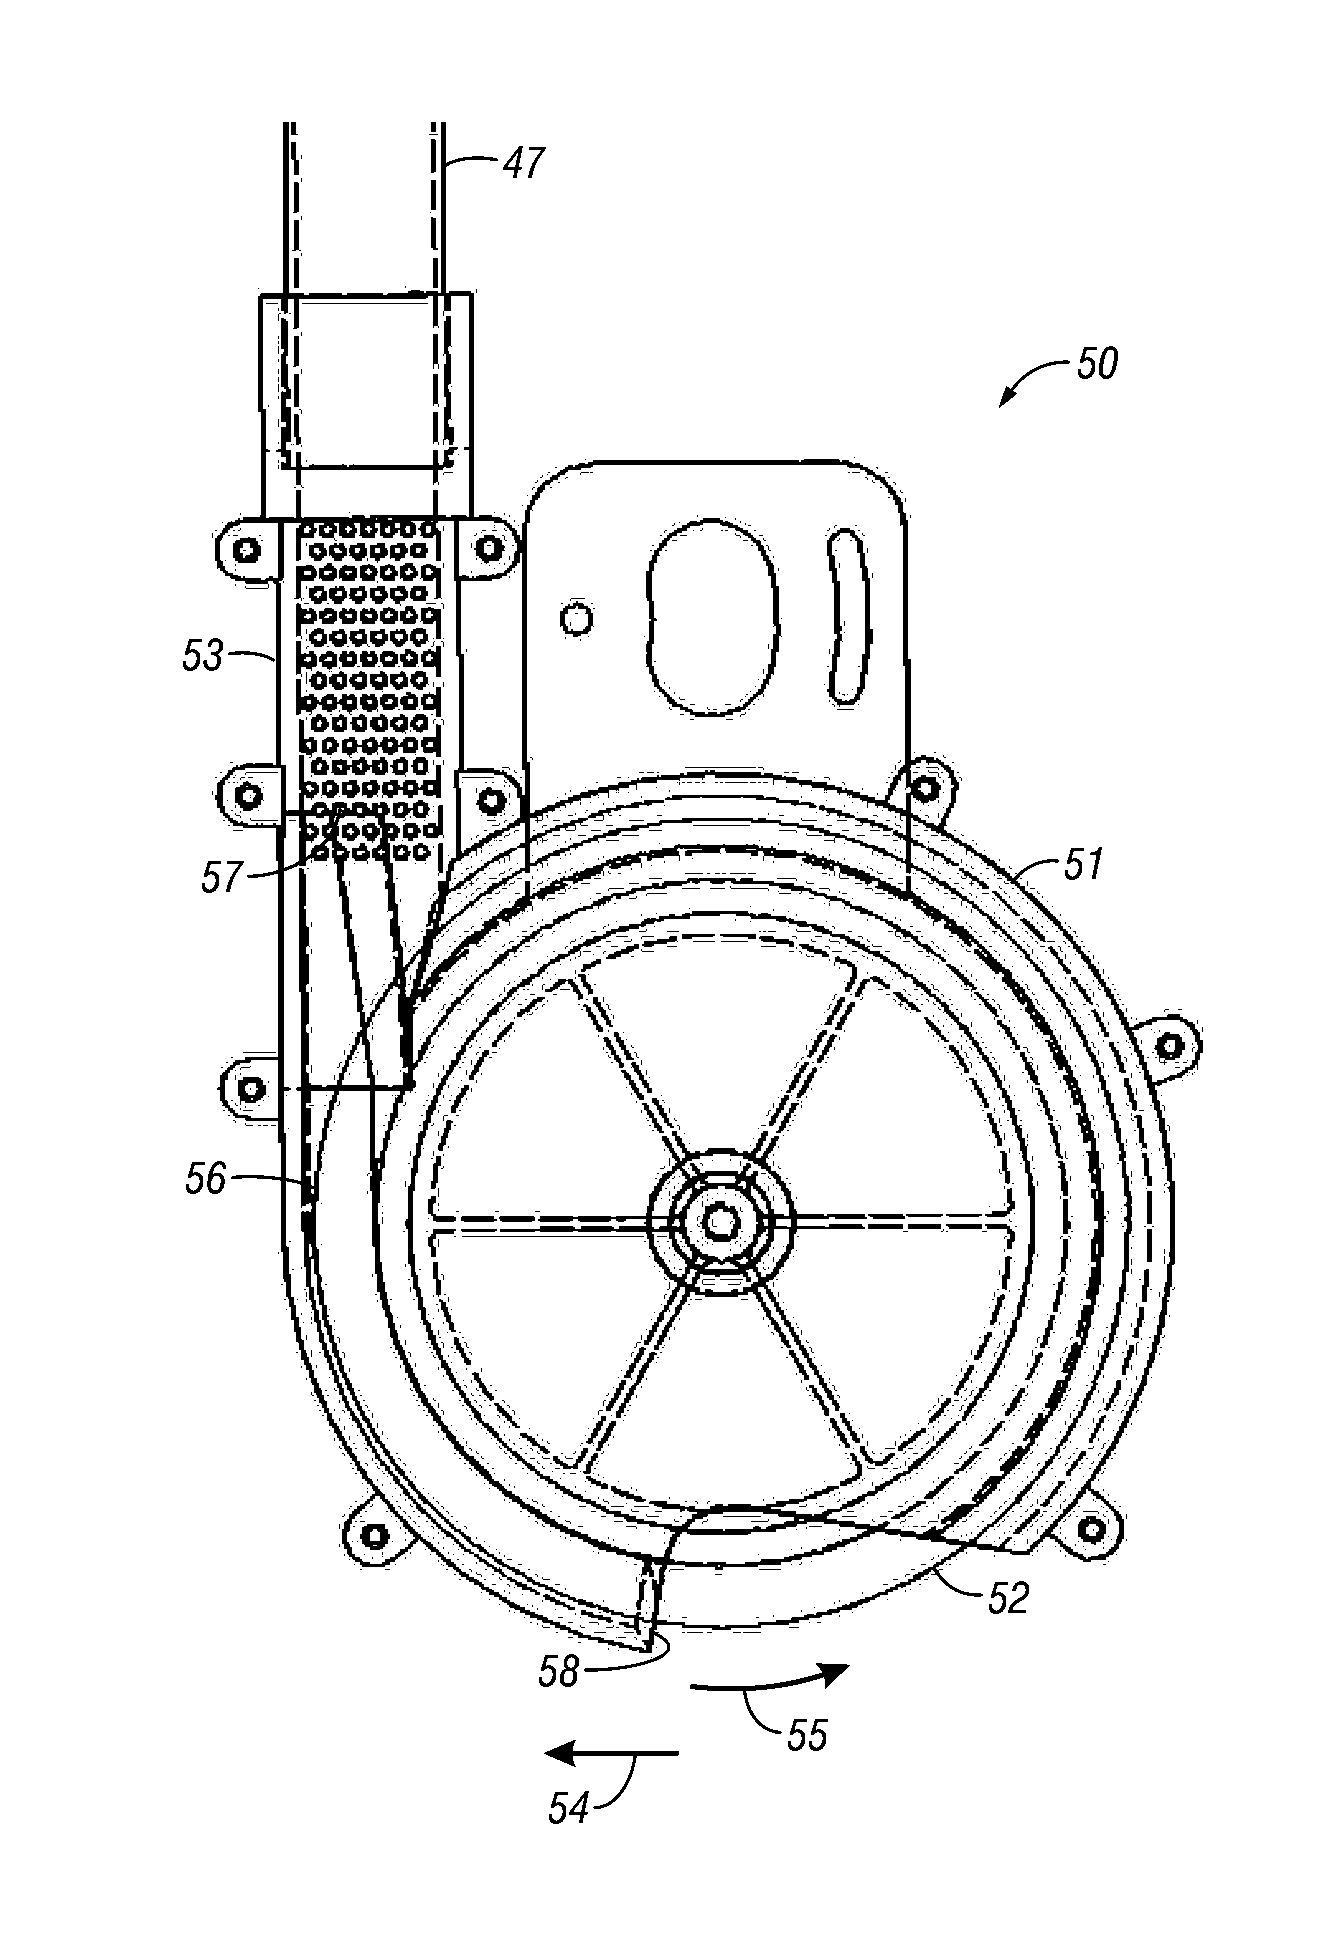 Planter with seed delivery apparatus